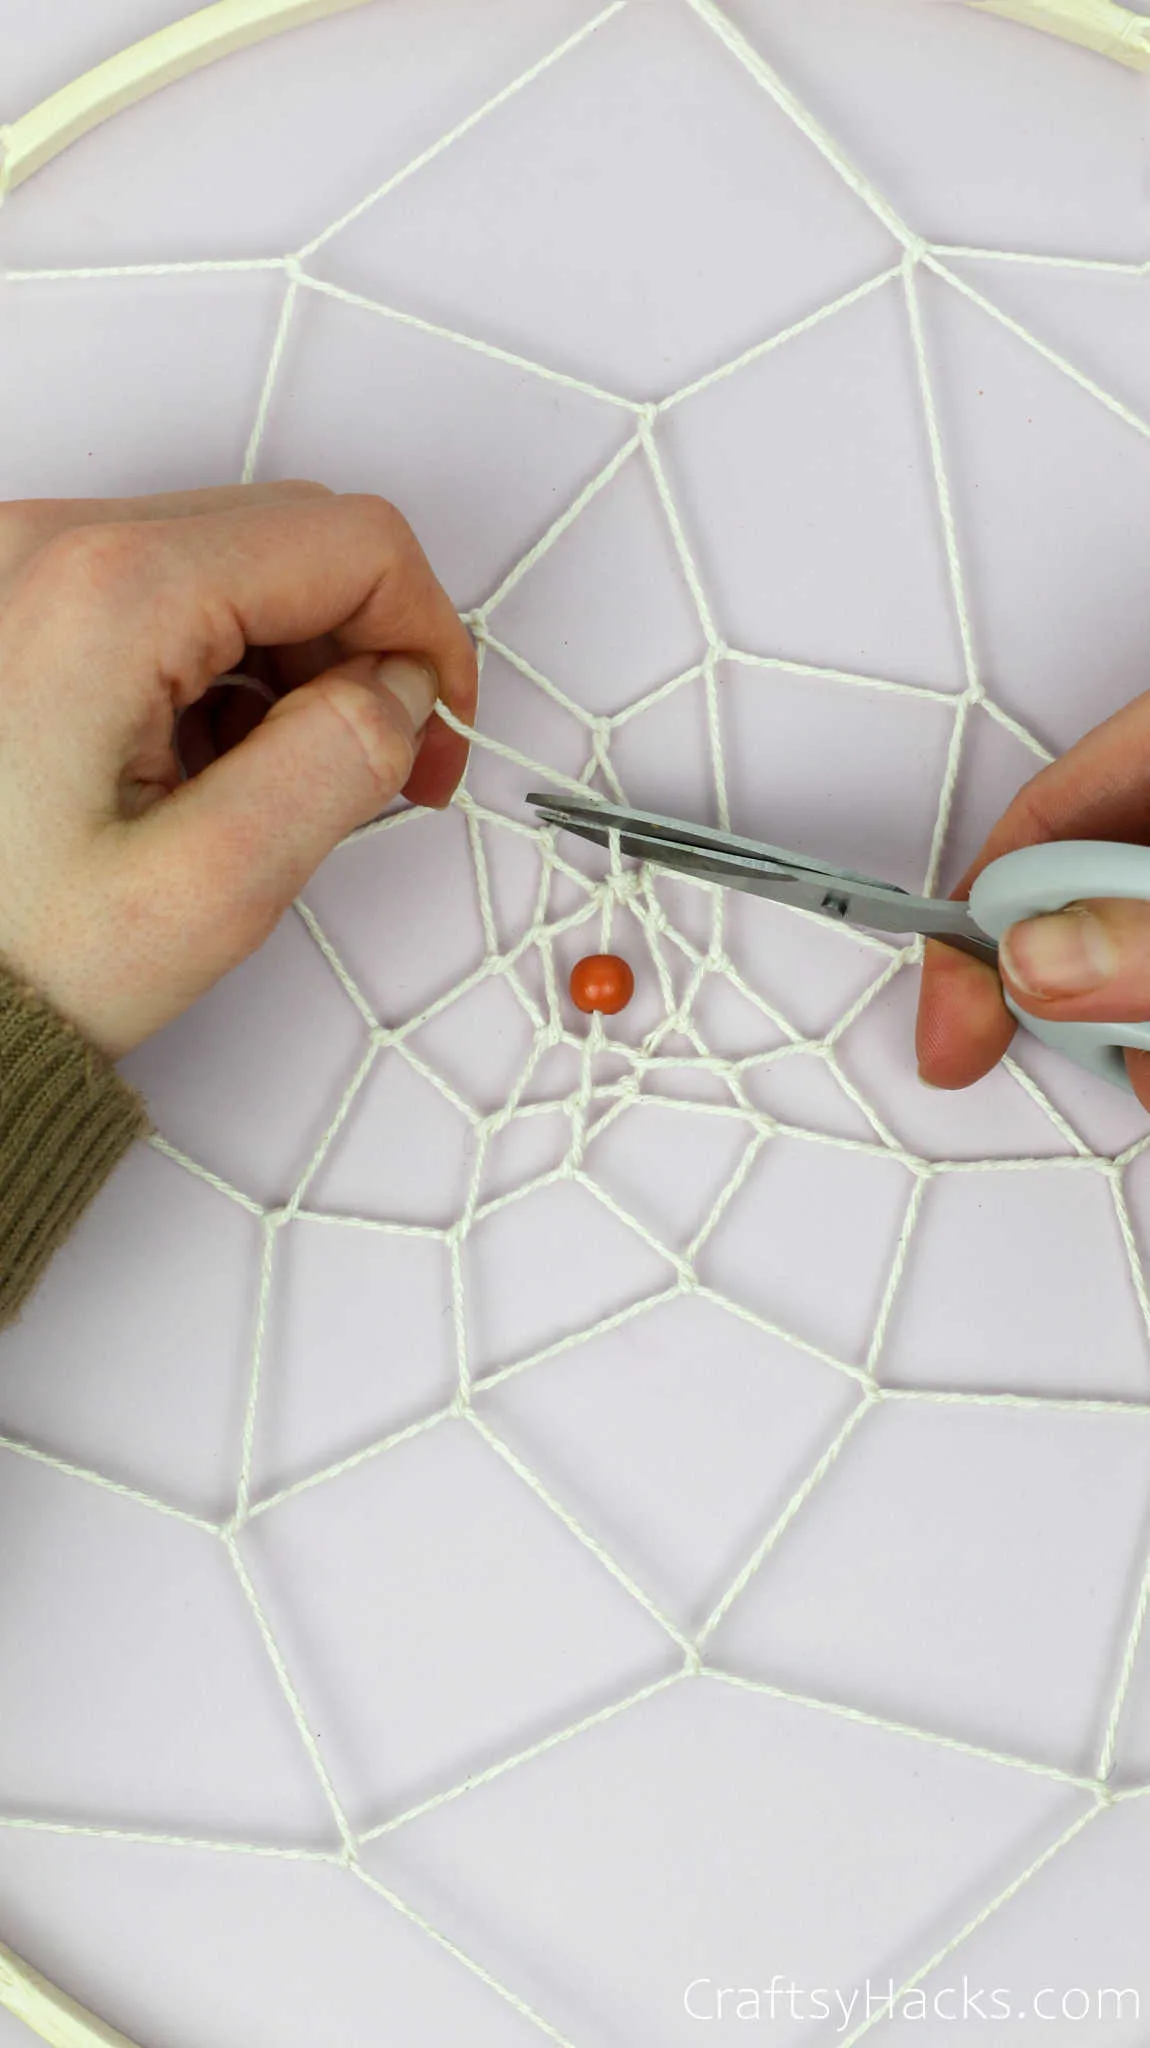 cutting end of string